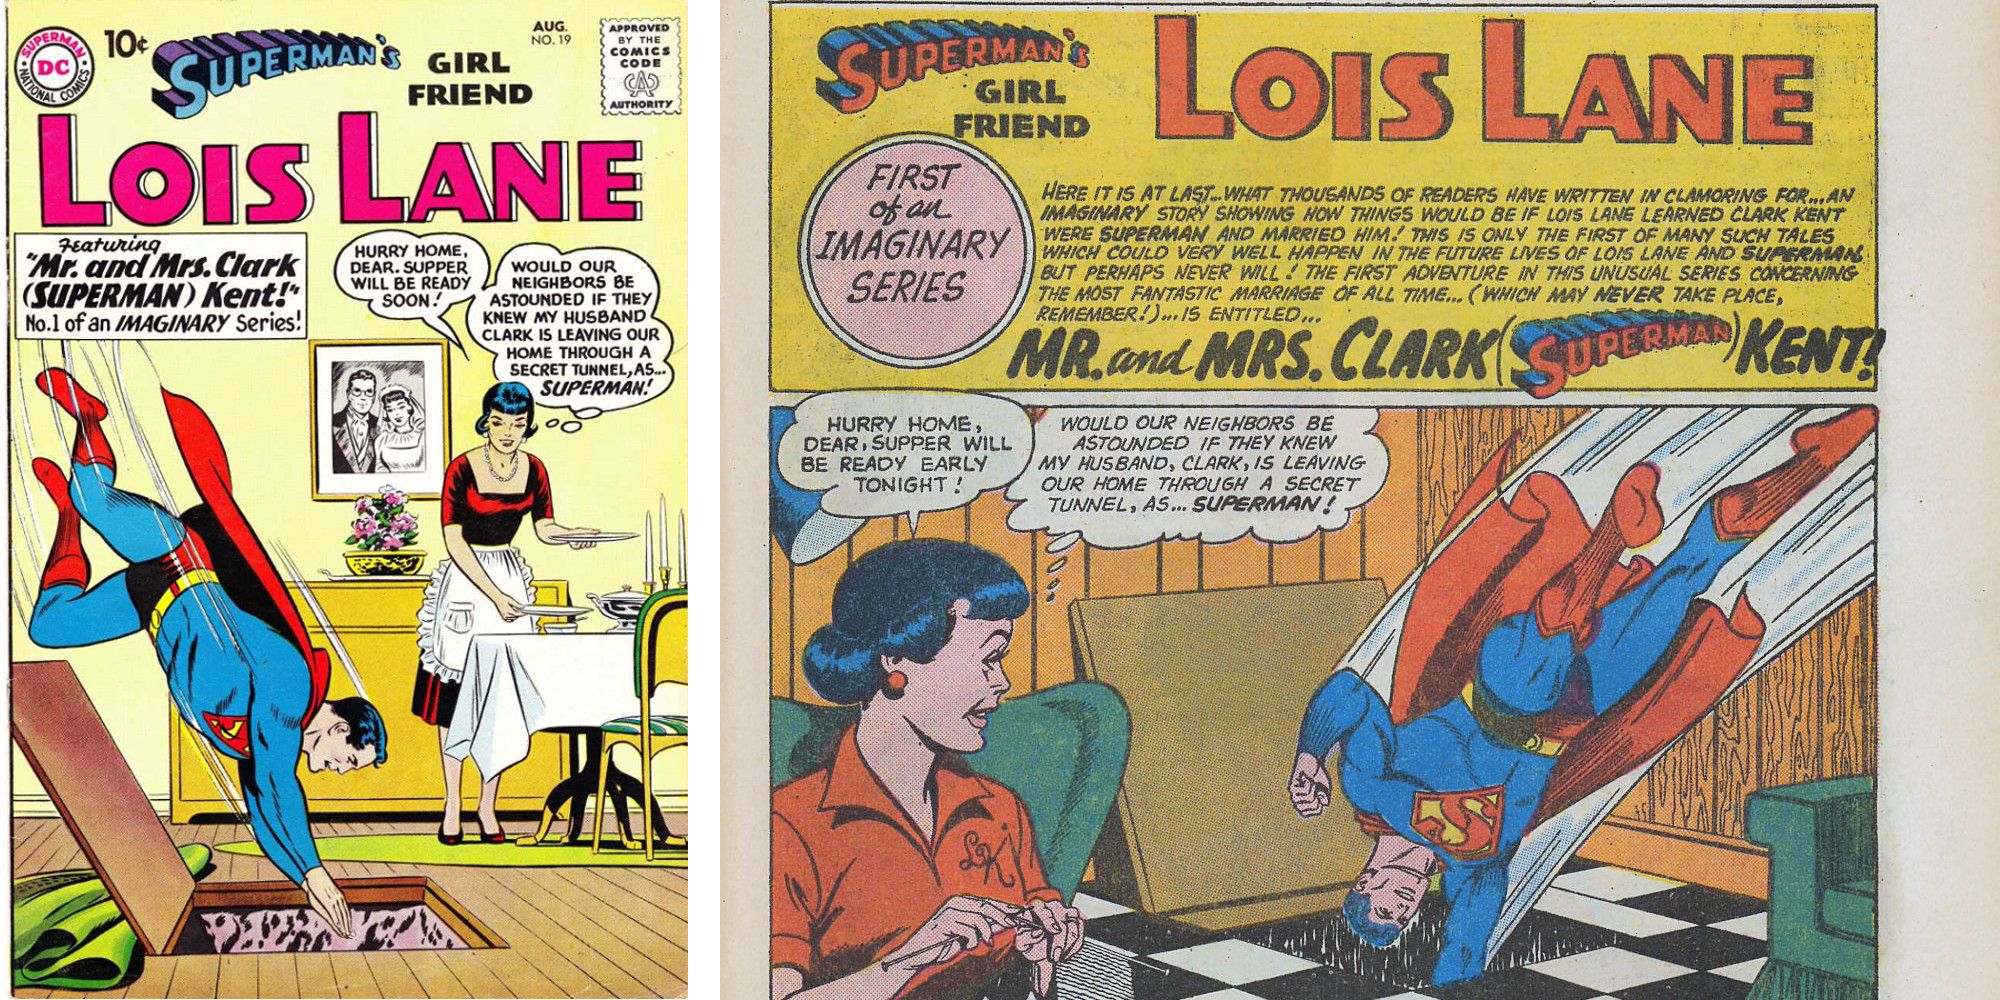 First Imaginary Story Lois Lane 19